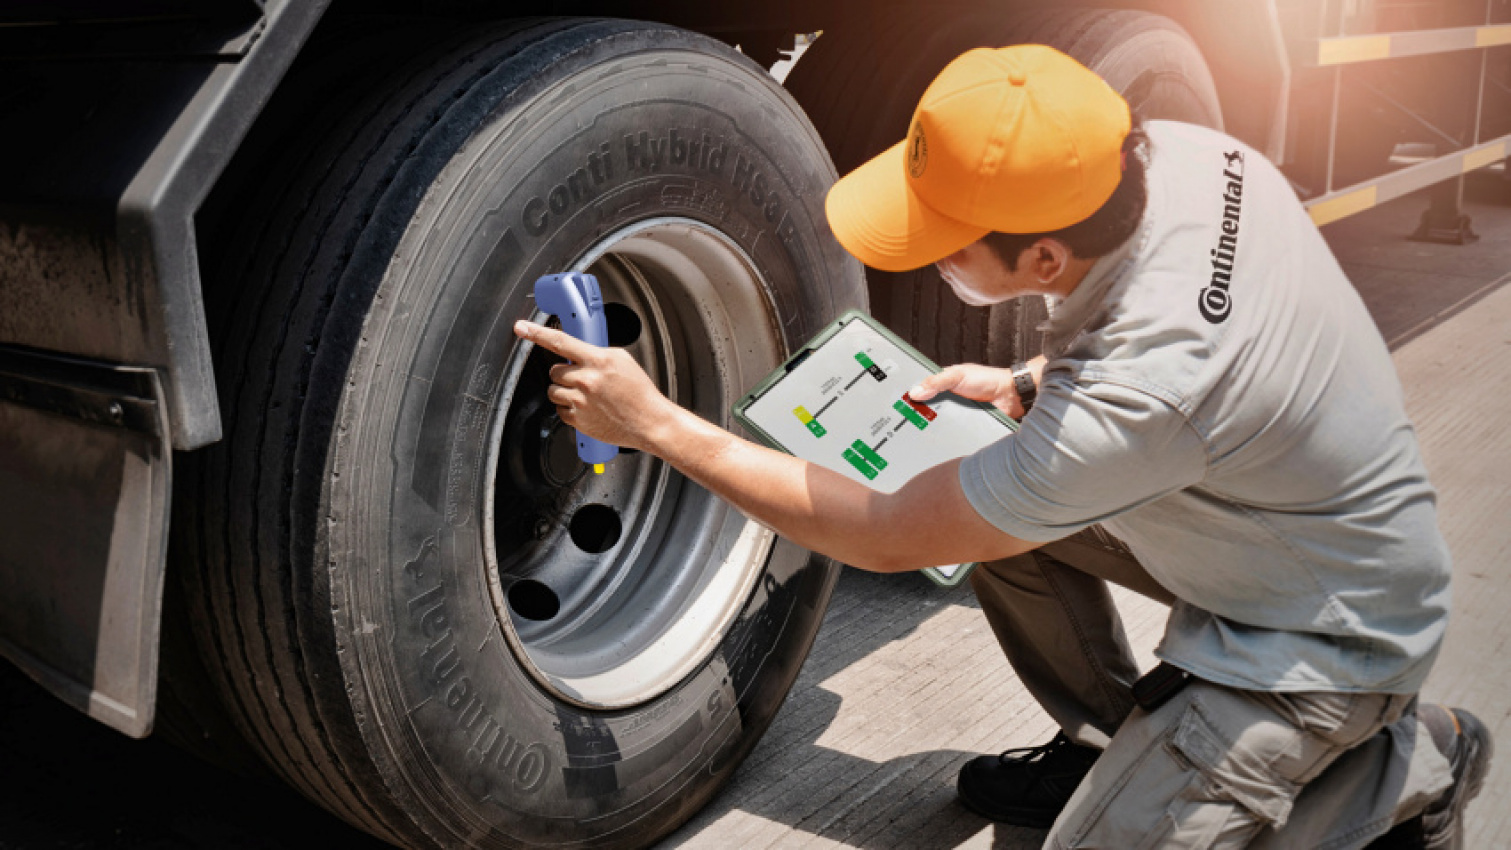 autos, cars, commercial vehicles, conti360º, continental tyres, fleet management, fleet operators, support services, tyre maintenance, conti360º can help fleet operators run their vehicles more efficiently and reduce operating costs